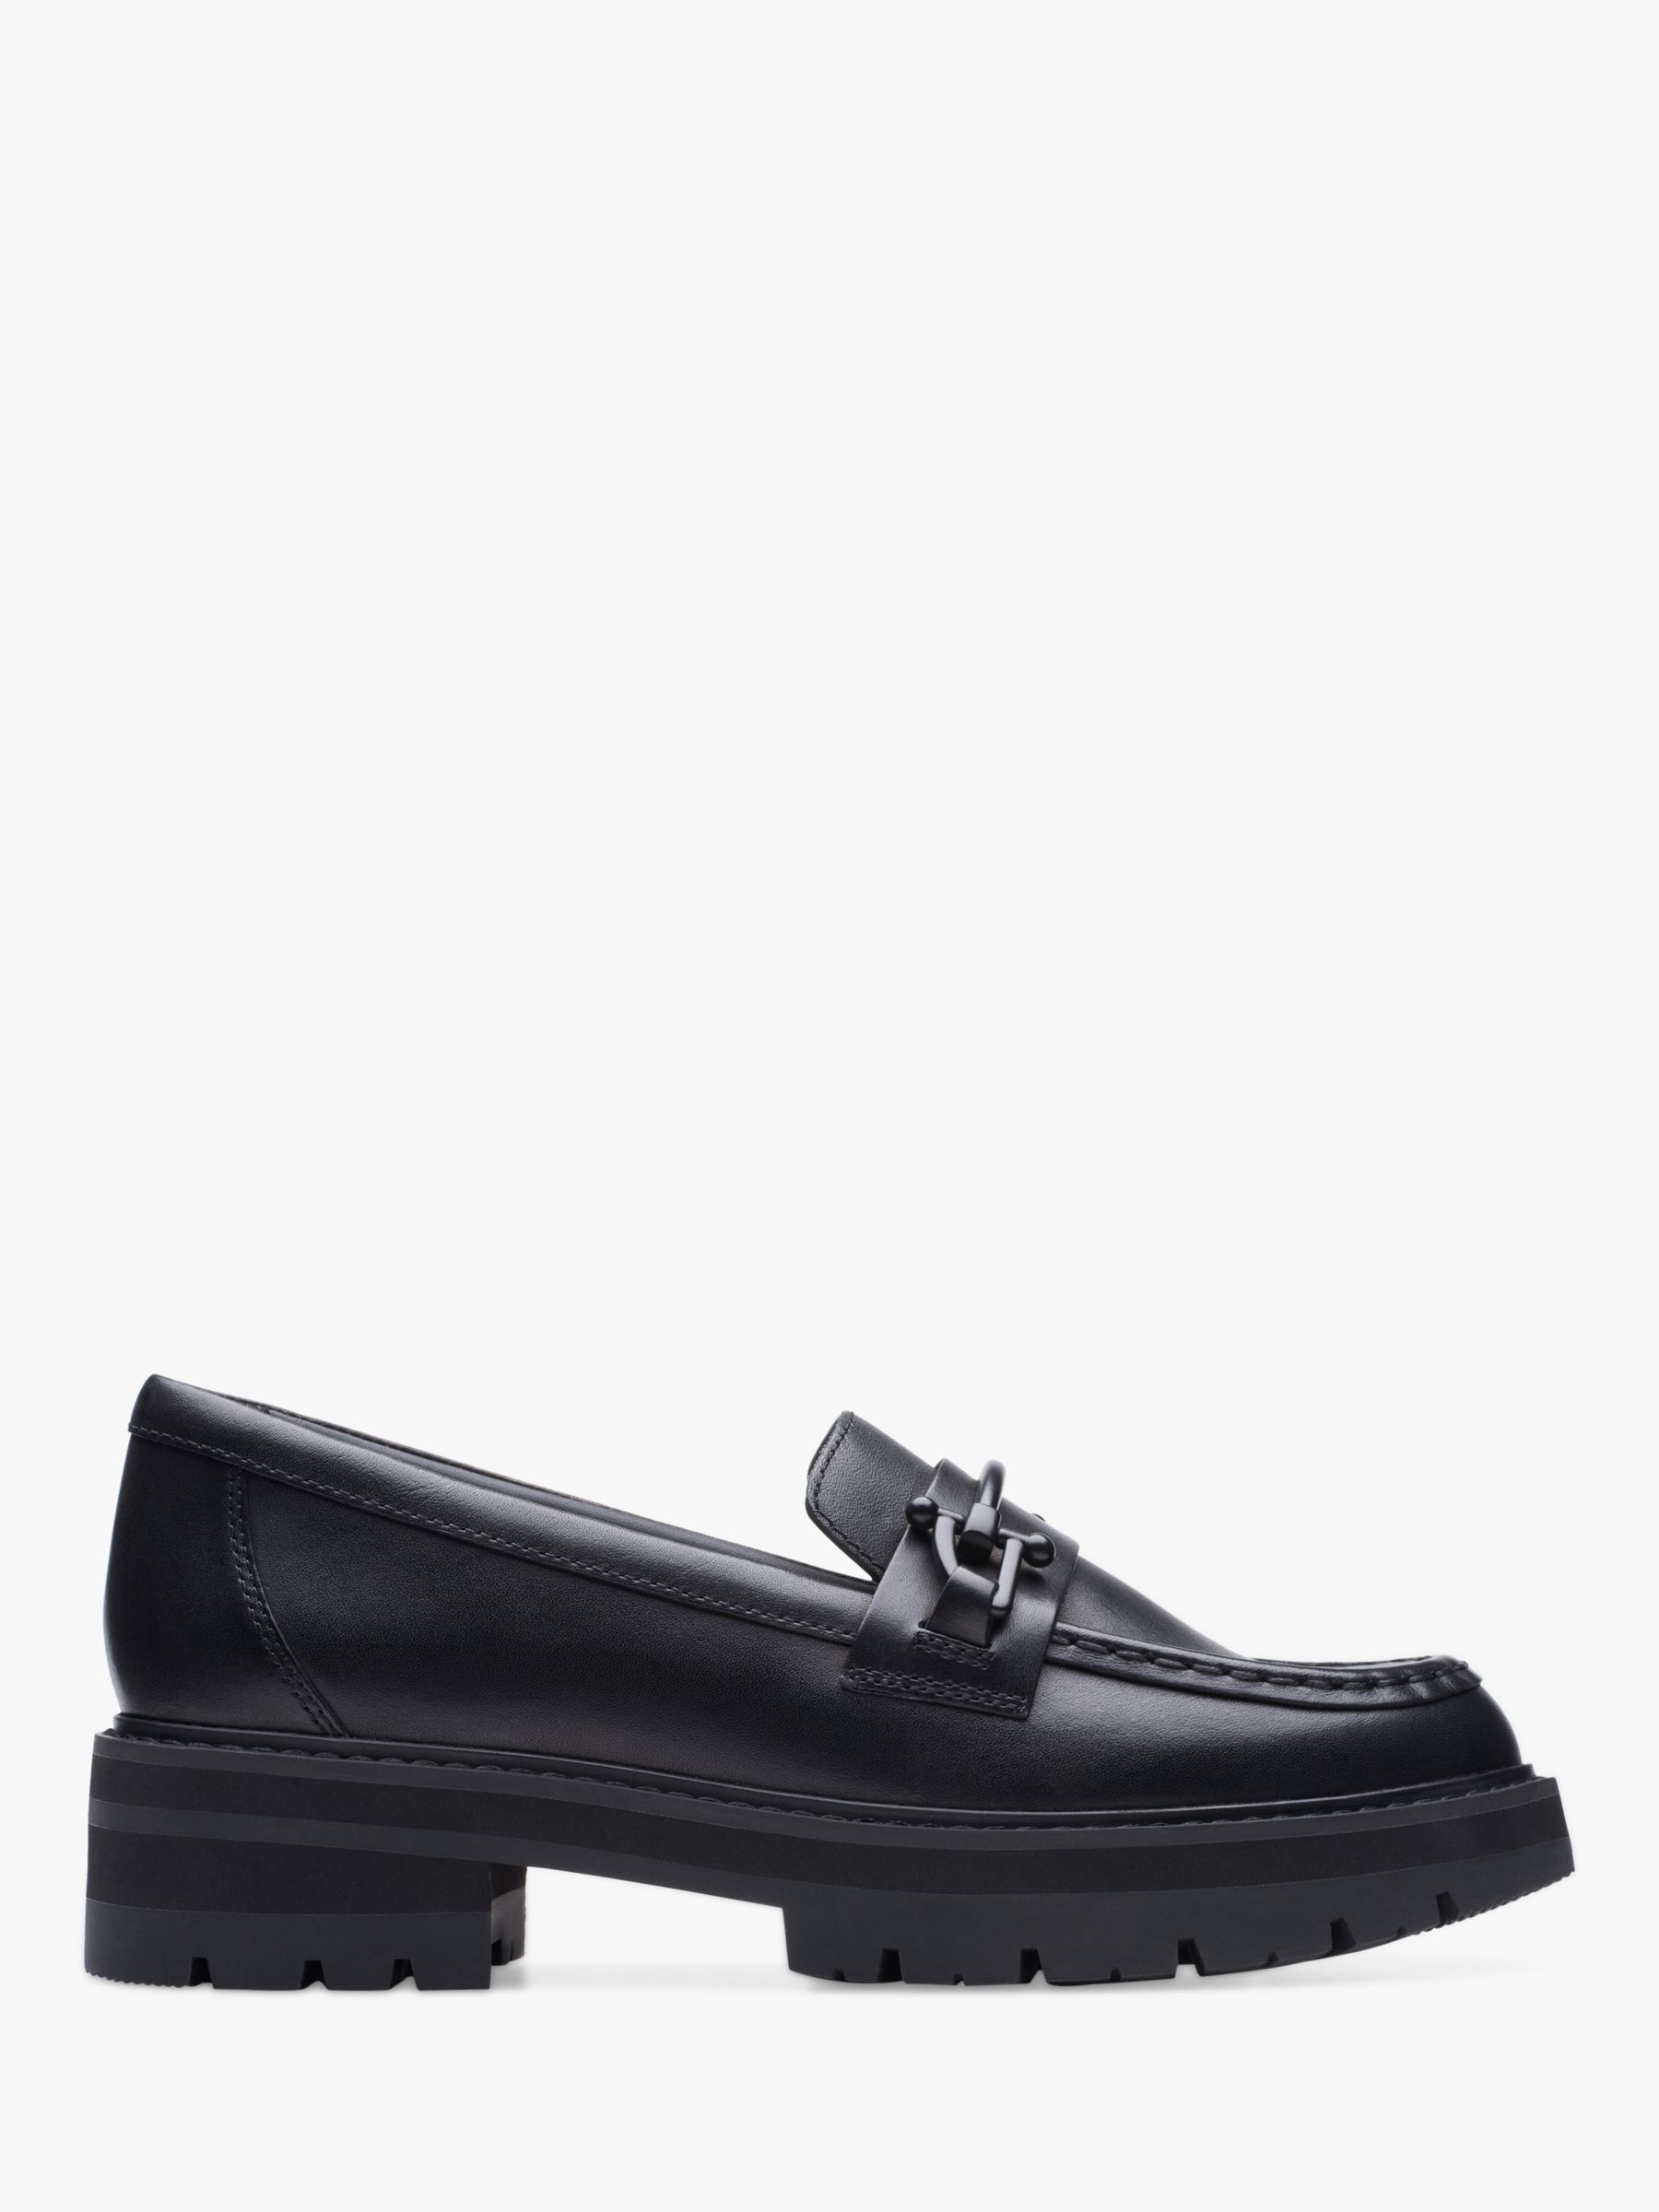 Clarks Orianna Bit Leather Chunky Sole Loafers, Black at John Lewis ...